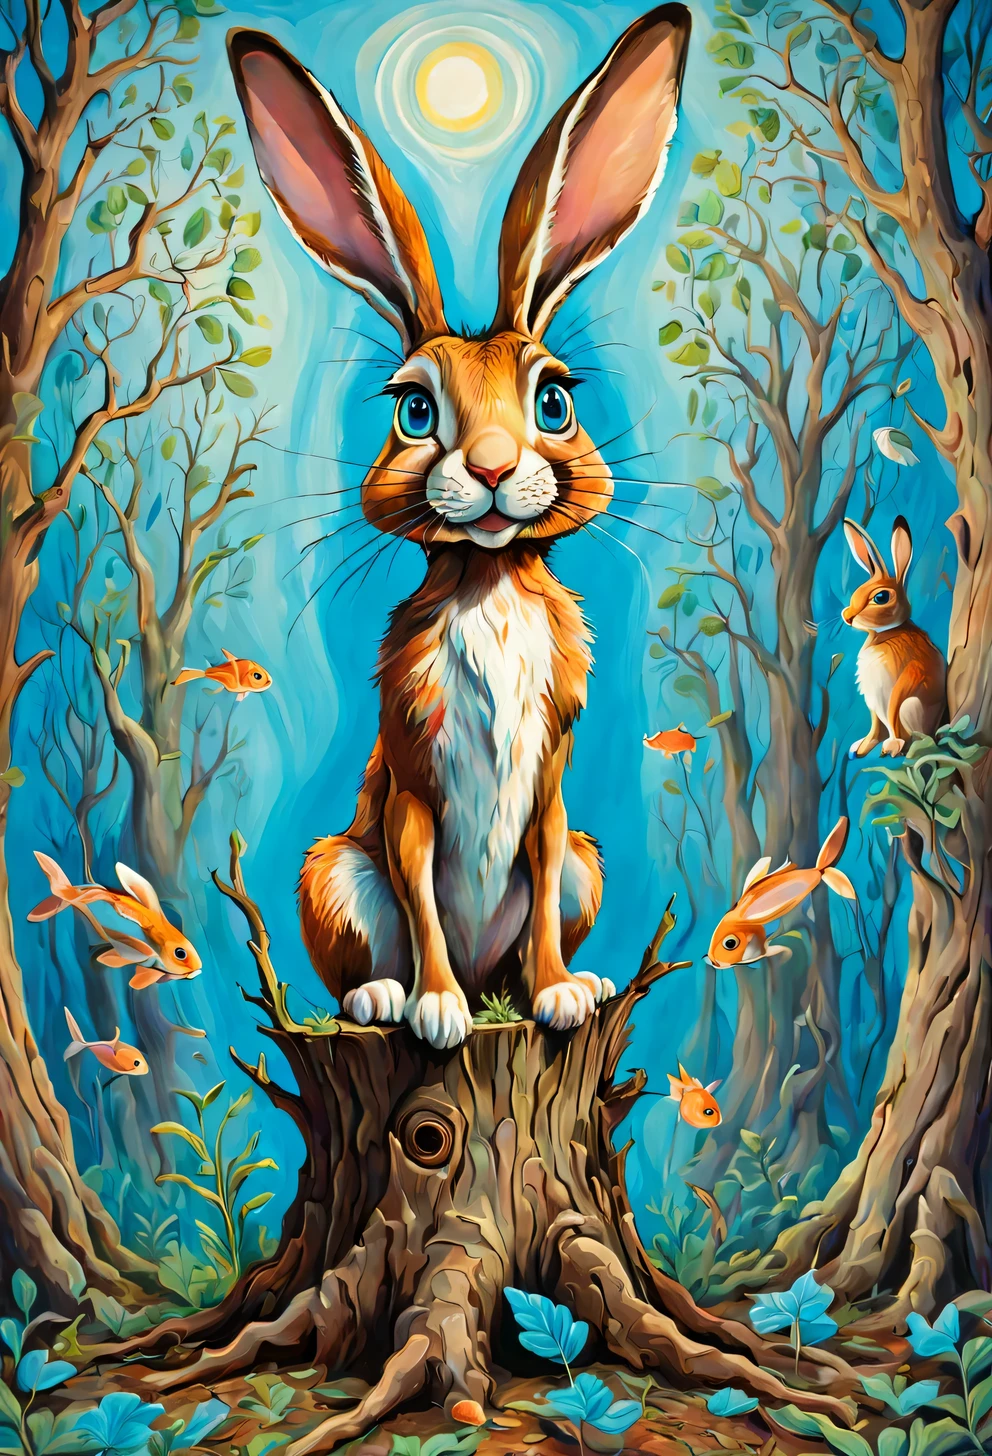 Psychedelic style in the style of Esau Andrews, cartoon hare thin and long grows out of an old stump, branches with leaves grow from the ears of a hare, the hare has big blue eyes, looking up at ears, fish with legs stand around the hare and look at the hare in surprise, Esau Andrews style, surreal oil painting, author: Do it, Southern Gothic, Art style, This is brick art, magical realism painting, pastel shades, sharp lines, small parts, described in detail, Swirling patterns, Abstract shapes, surreal, Trippy